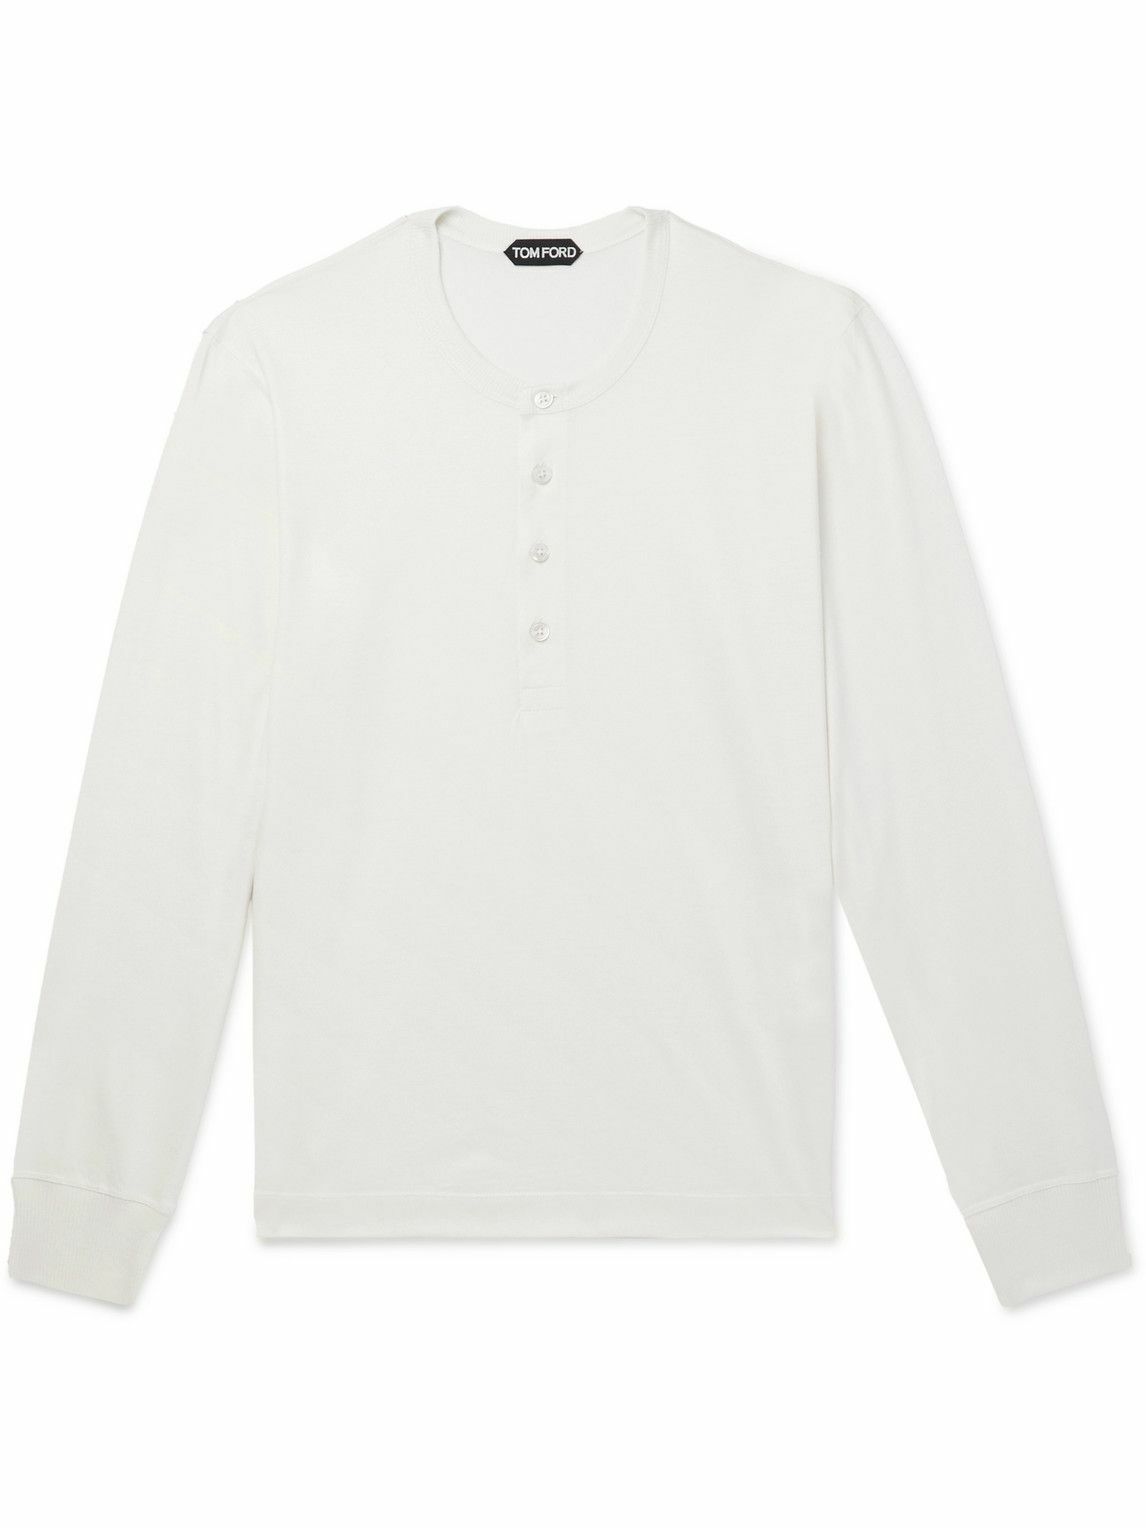 TOM FORD - Silk and Cotton-Blend Jersey Henley T-Shirt - White TOM FORD